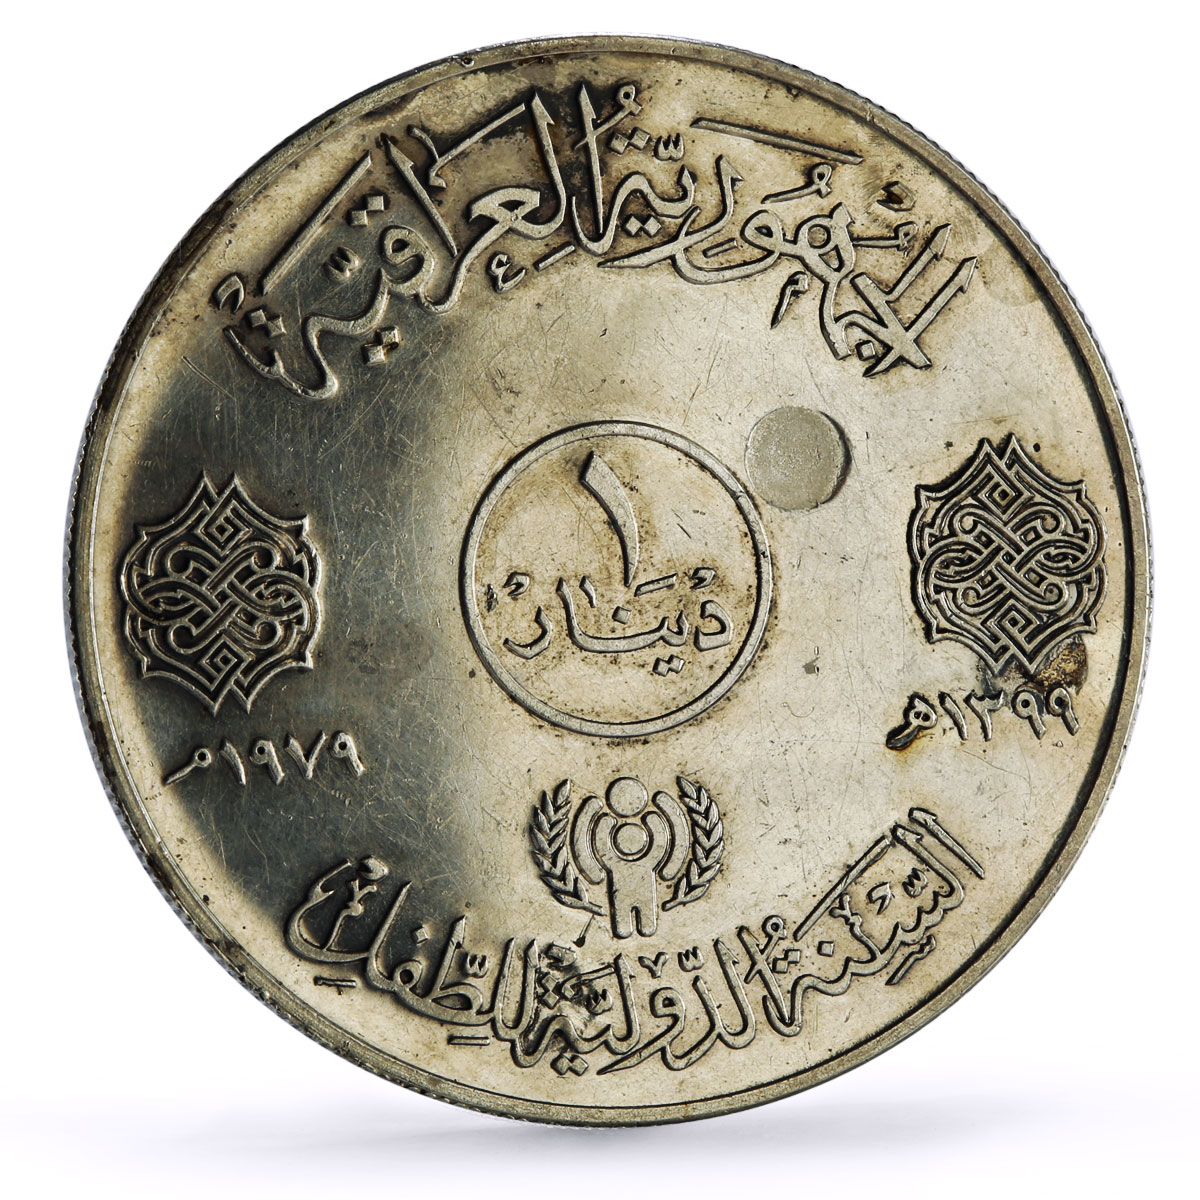 Iraq 1 dinar UNICEF Save the Children Child Year KM-145 proof silver coin 1979